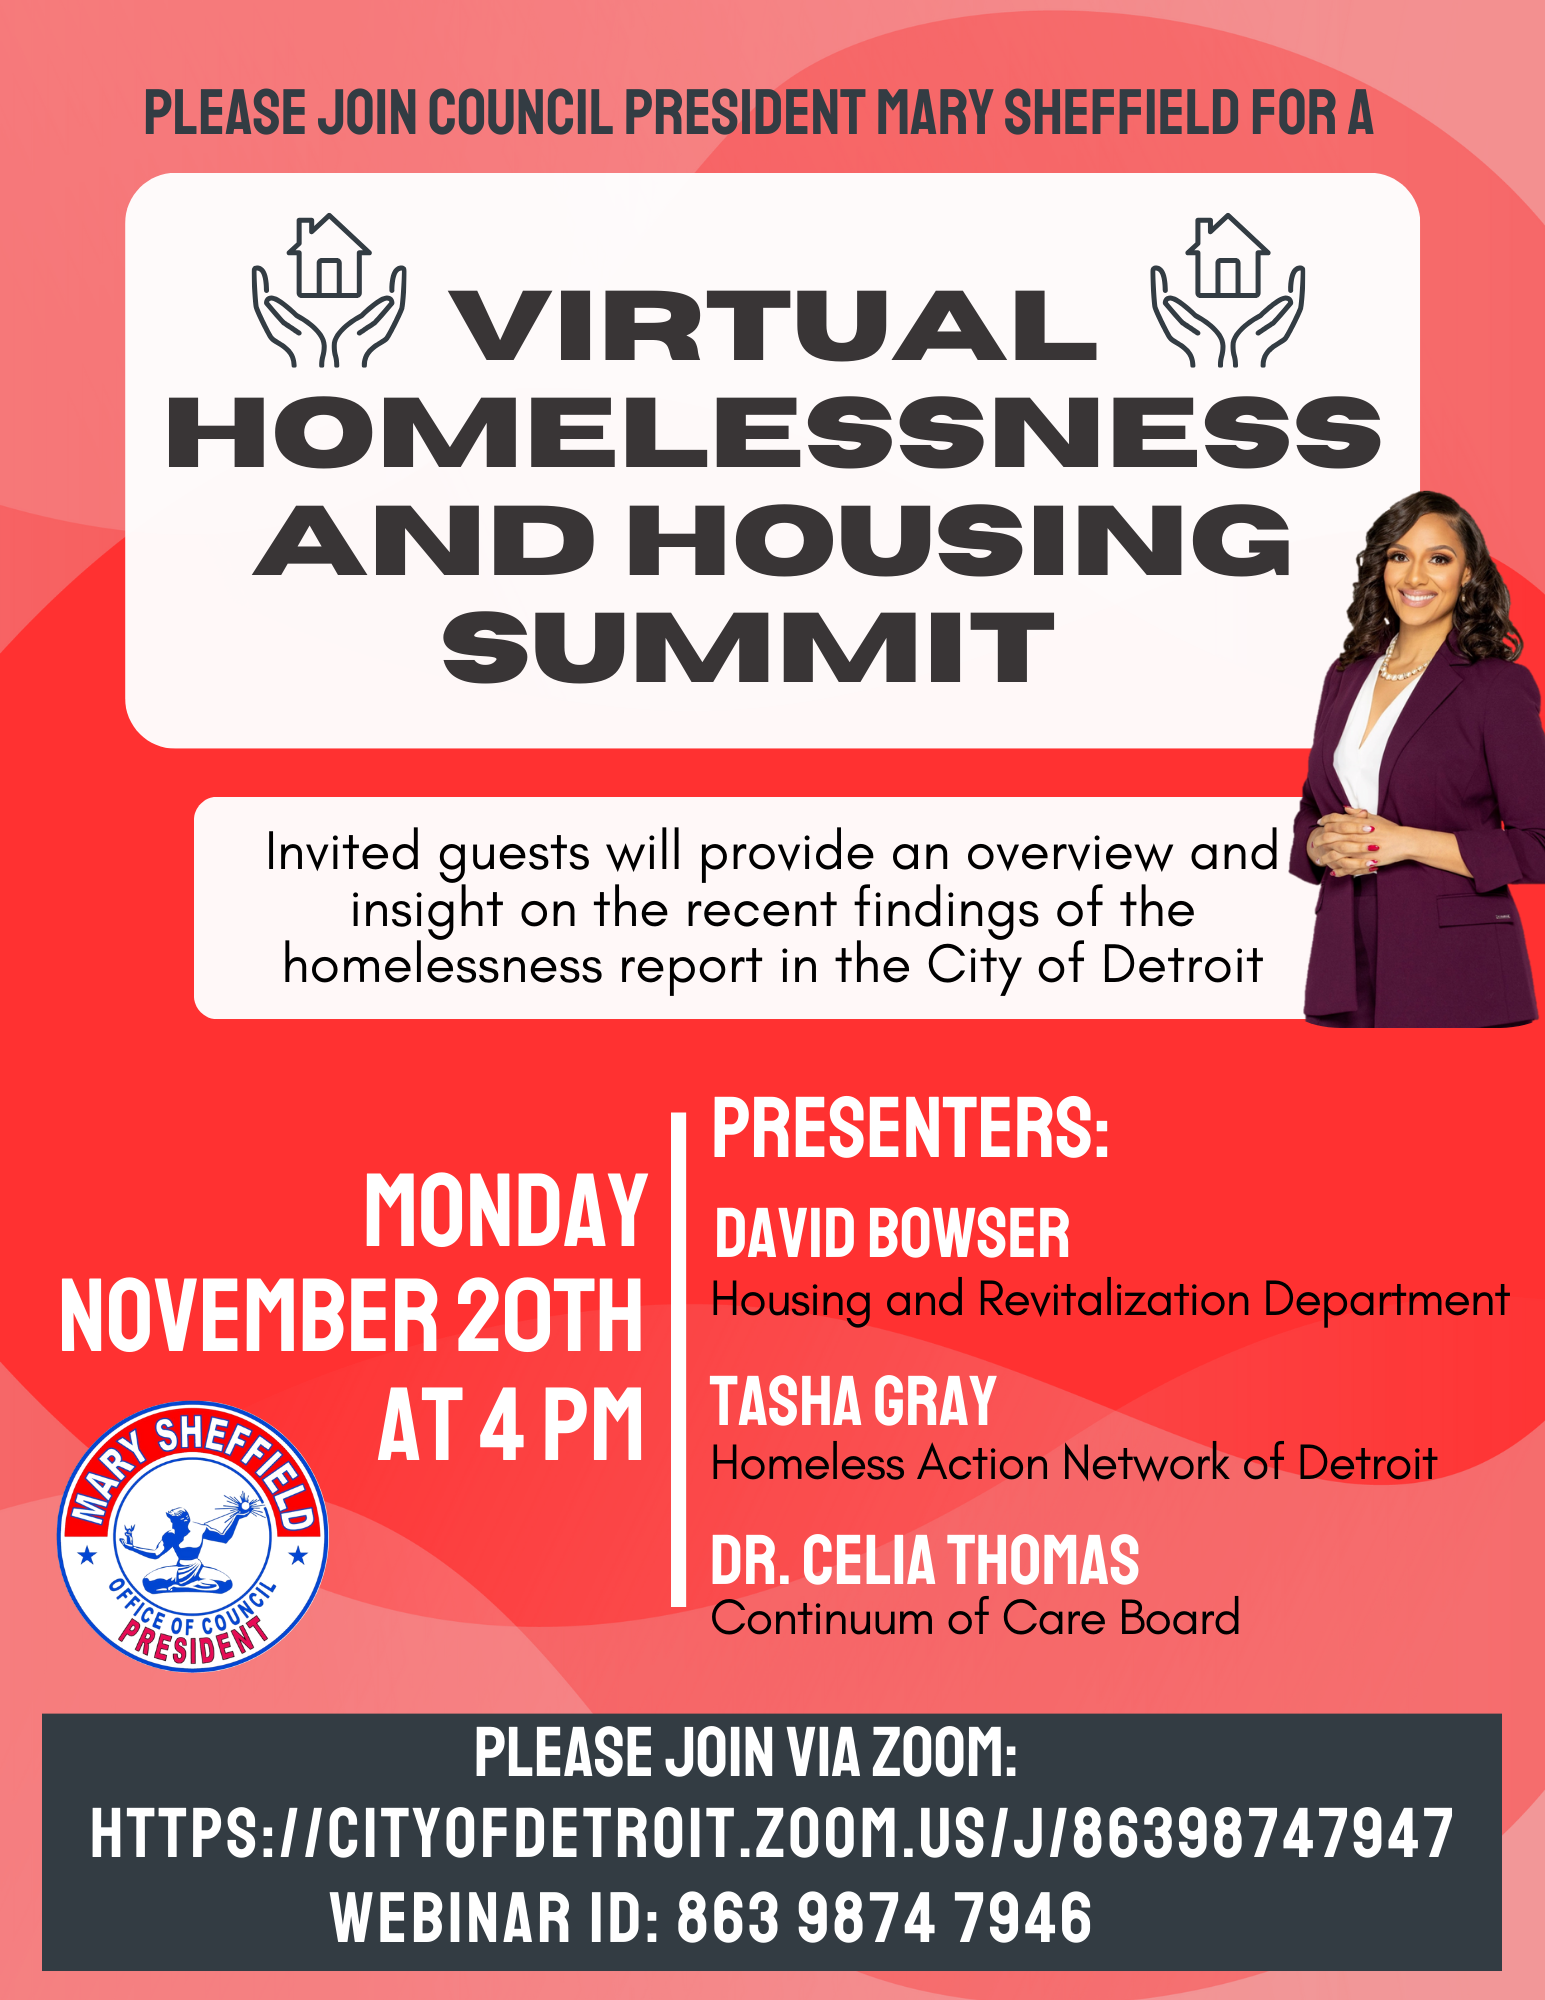 Council President Sheffield to Host Virtual Homelessness and Housing Summit